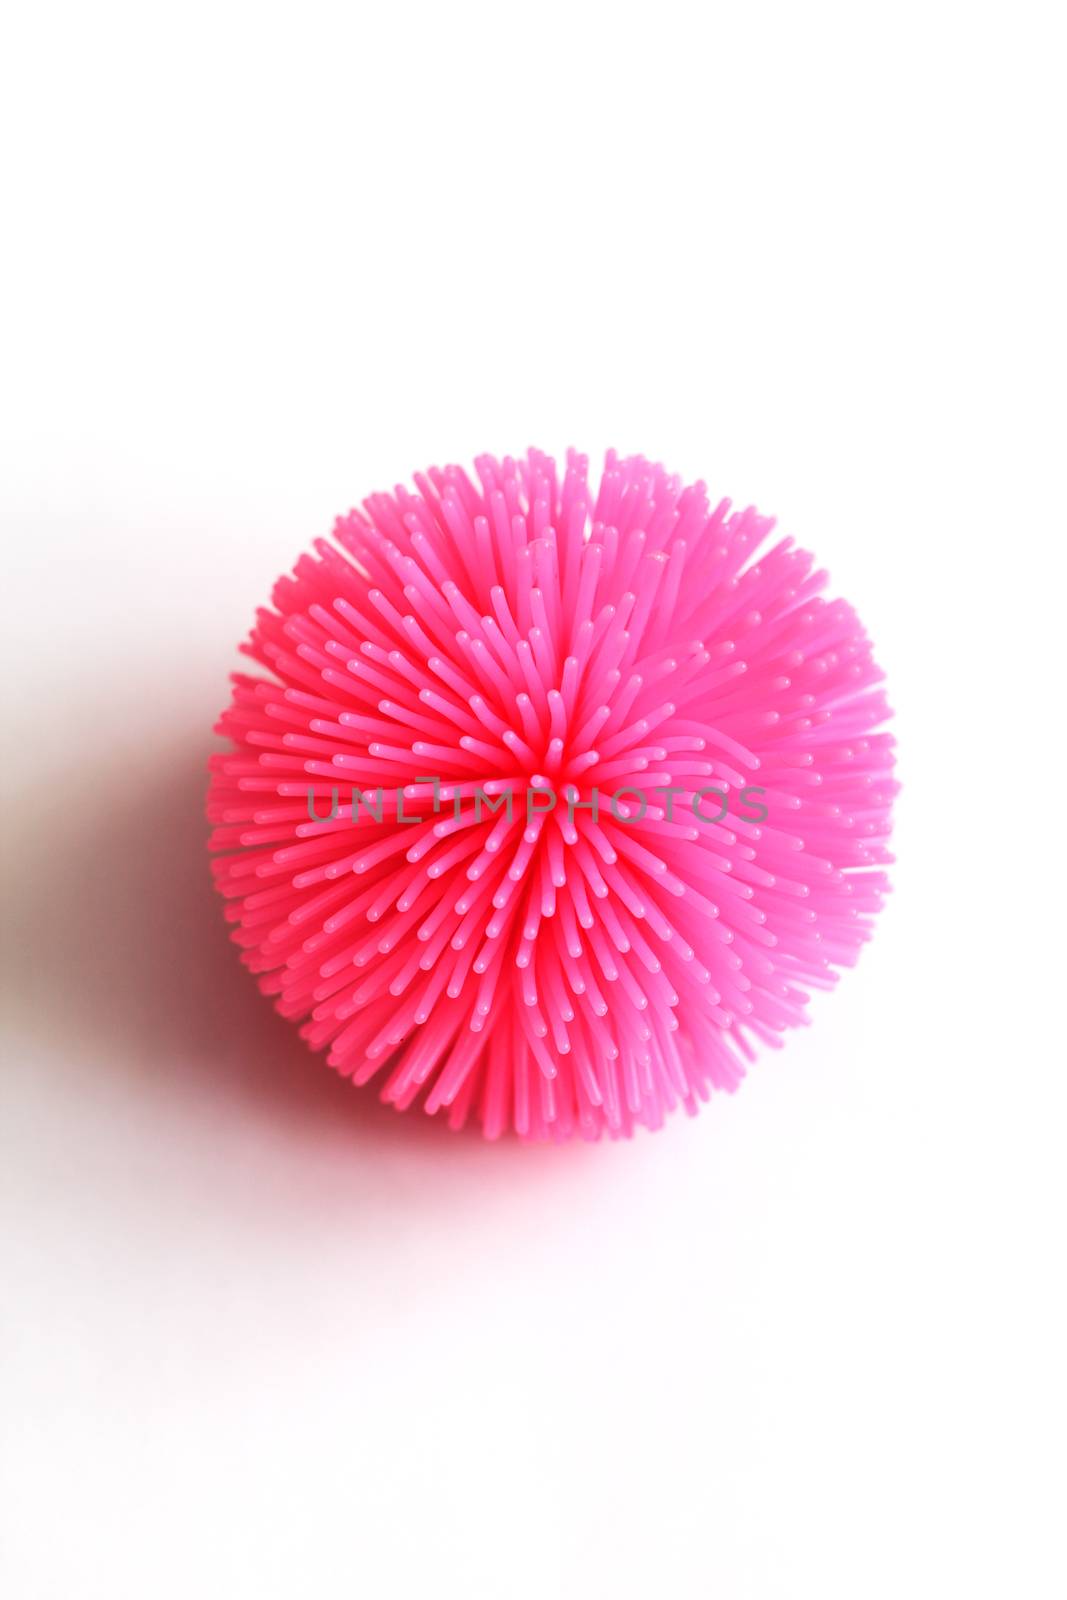 Rubber sensory ball of bright color by Voinakh